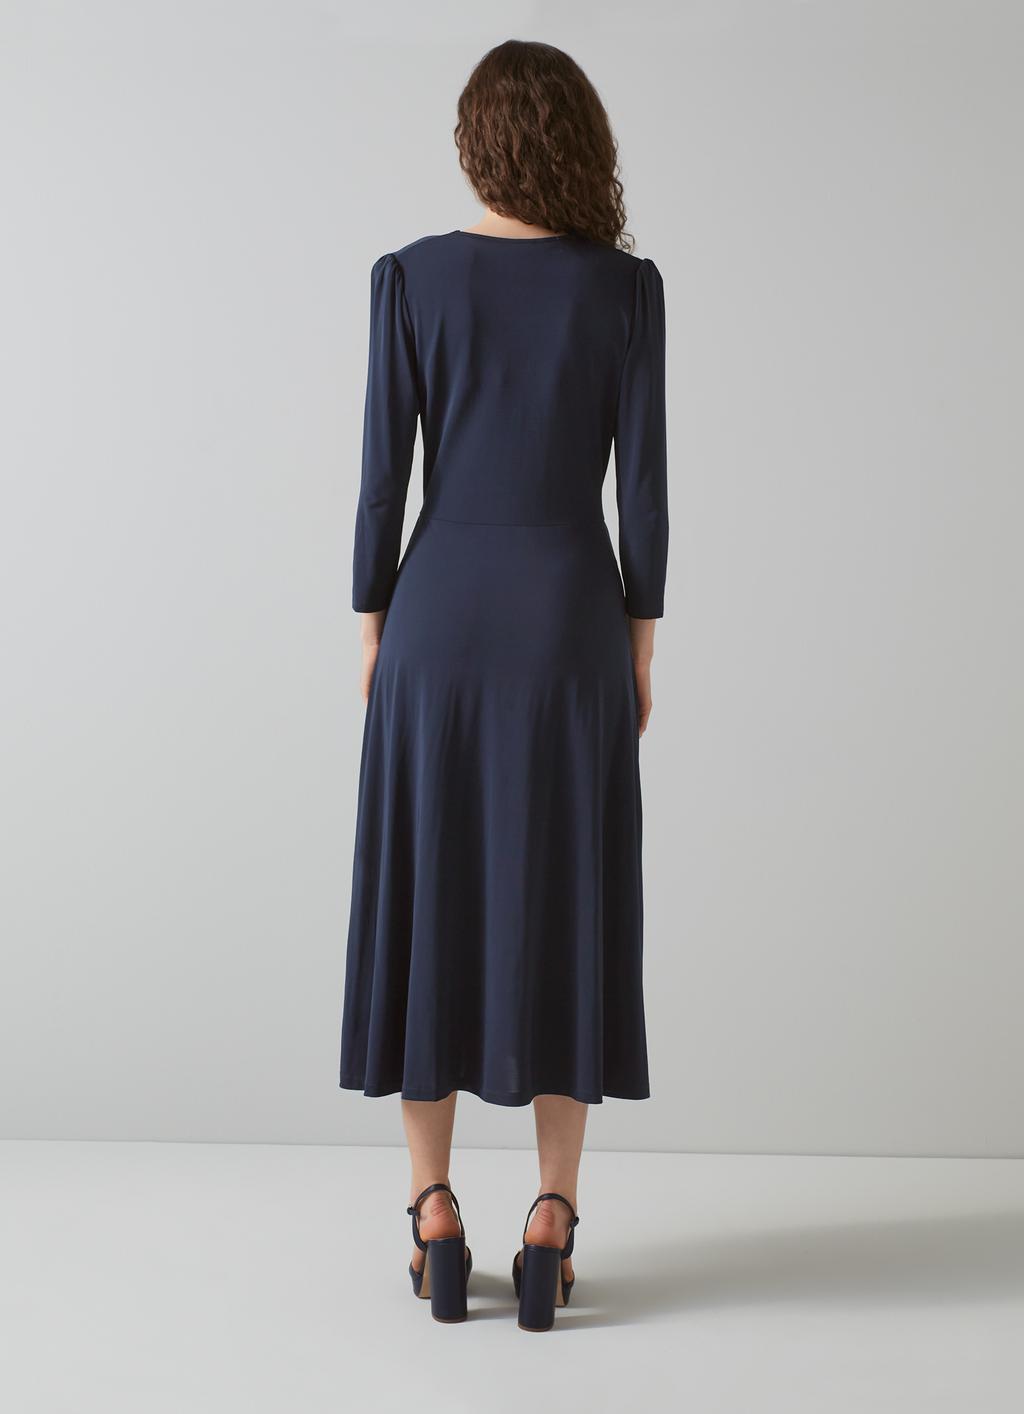 Lottie Navy Blue Ruched Front Midi Dress